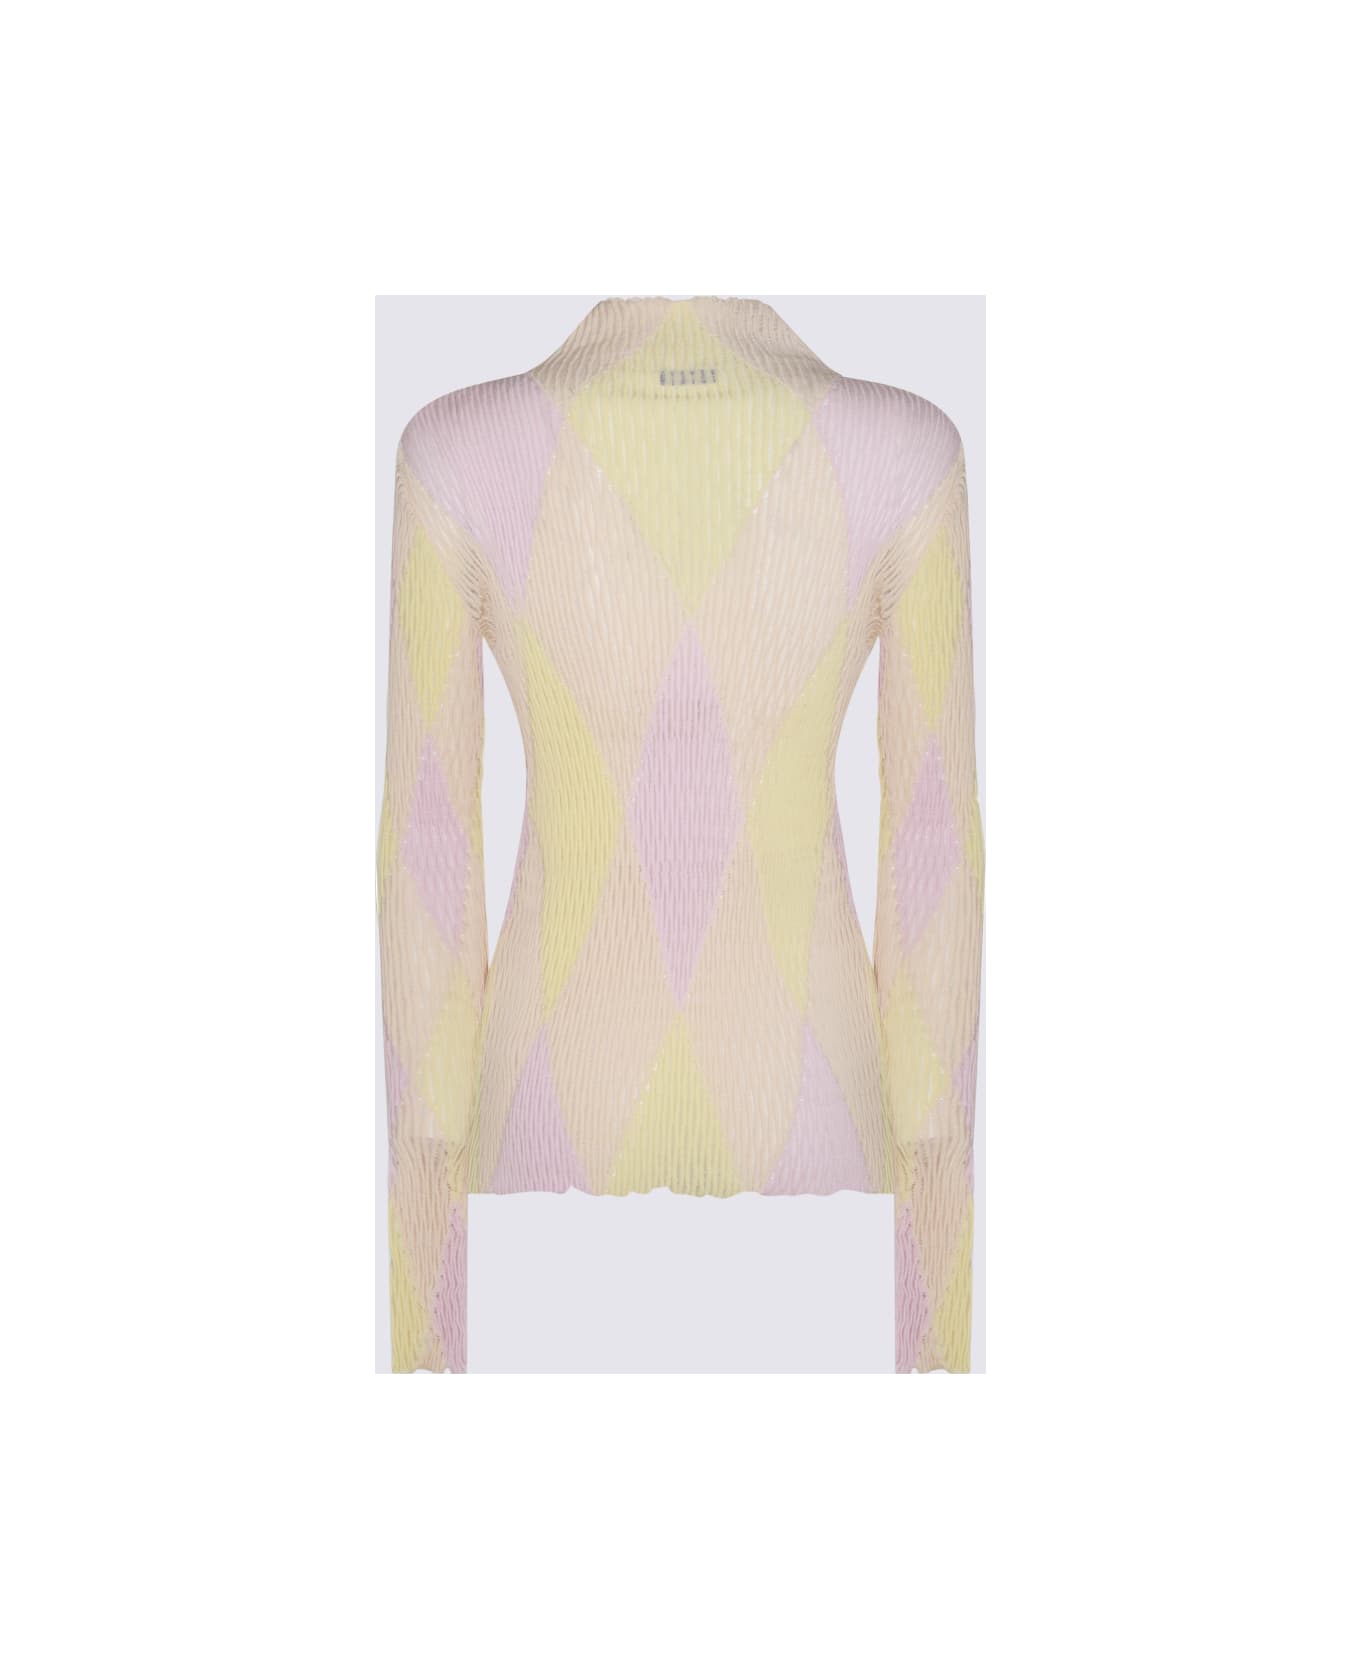 Burberry Eau White And Cream Cotton Knitwear - CAMEO IP PTTN